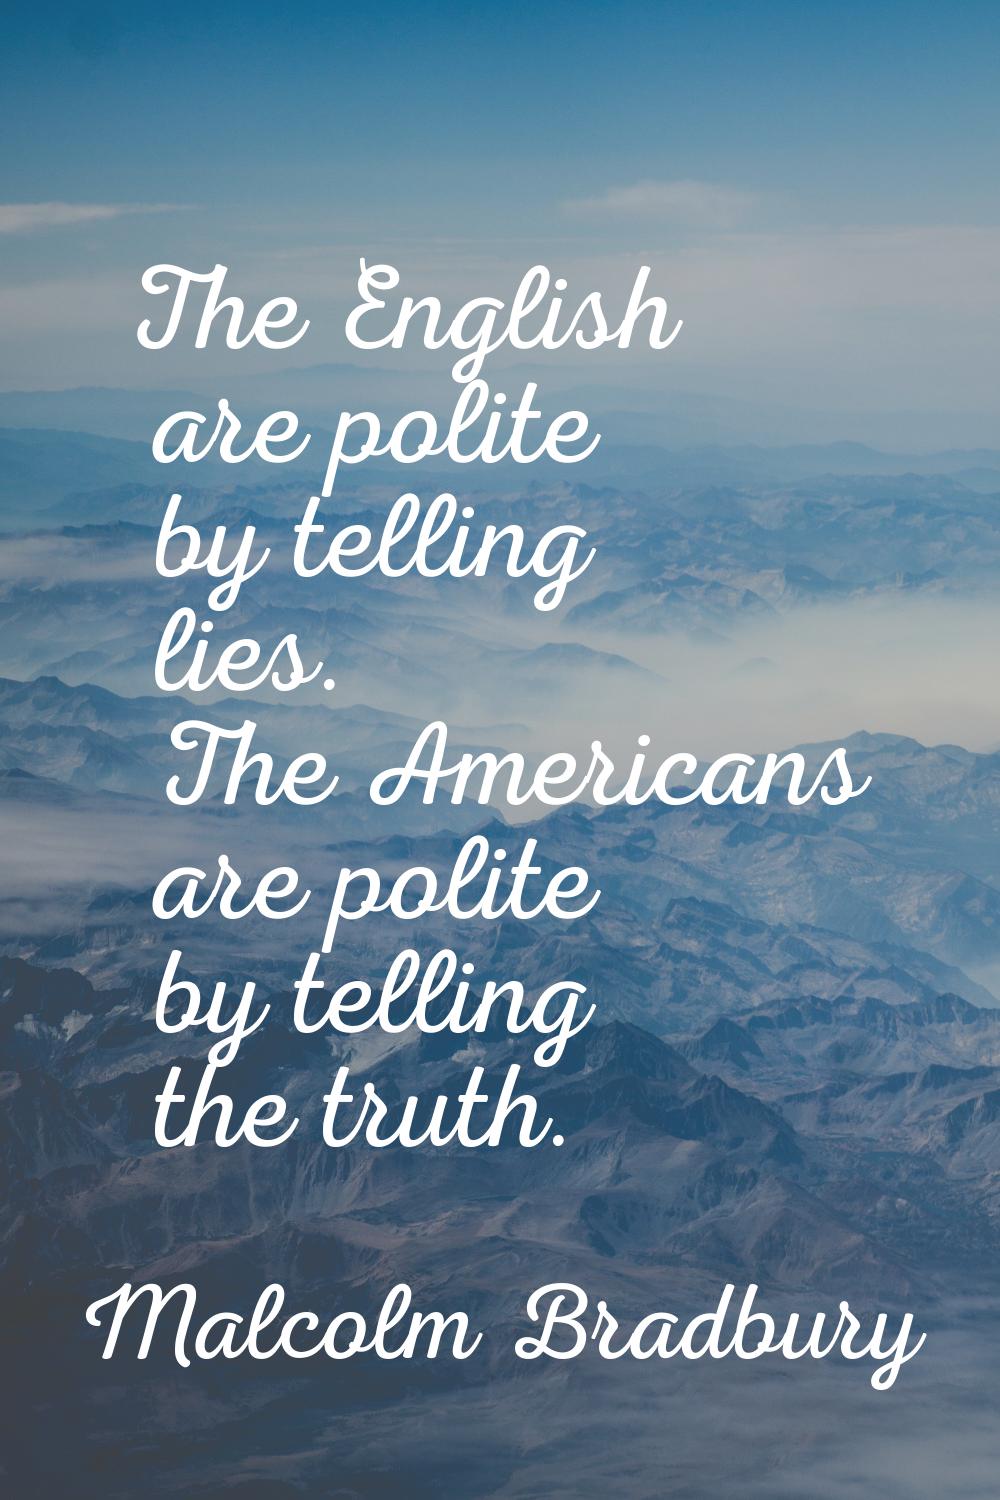 The English are polite by telling lies. The Americans are polite by telling the truth.